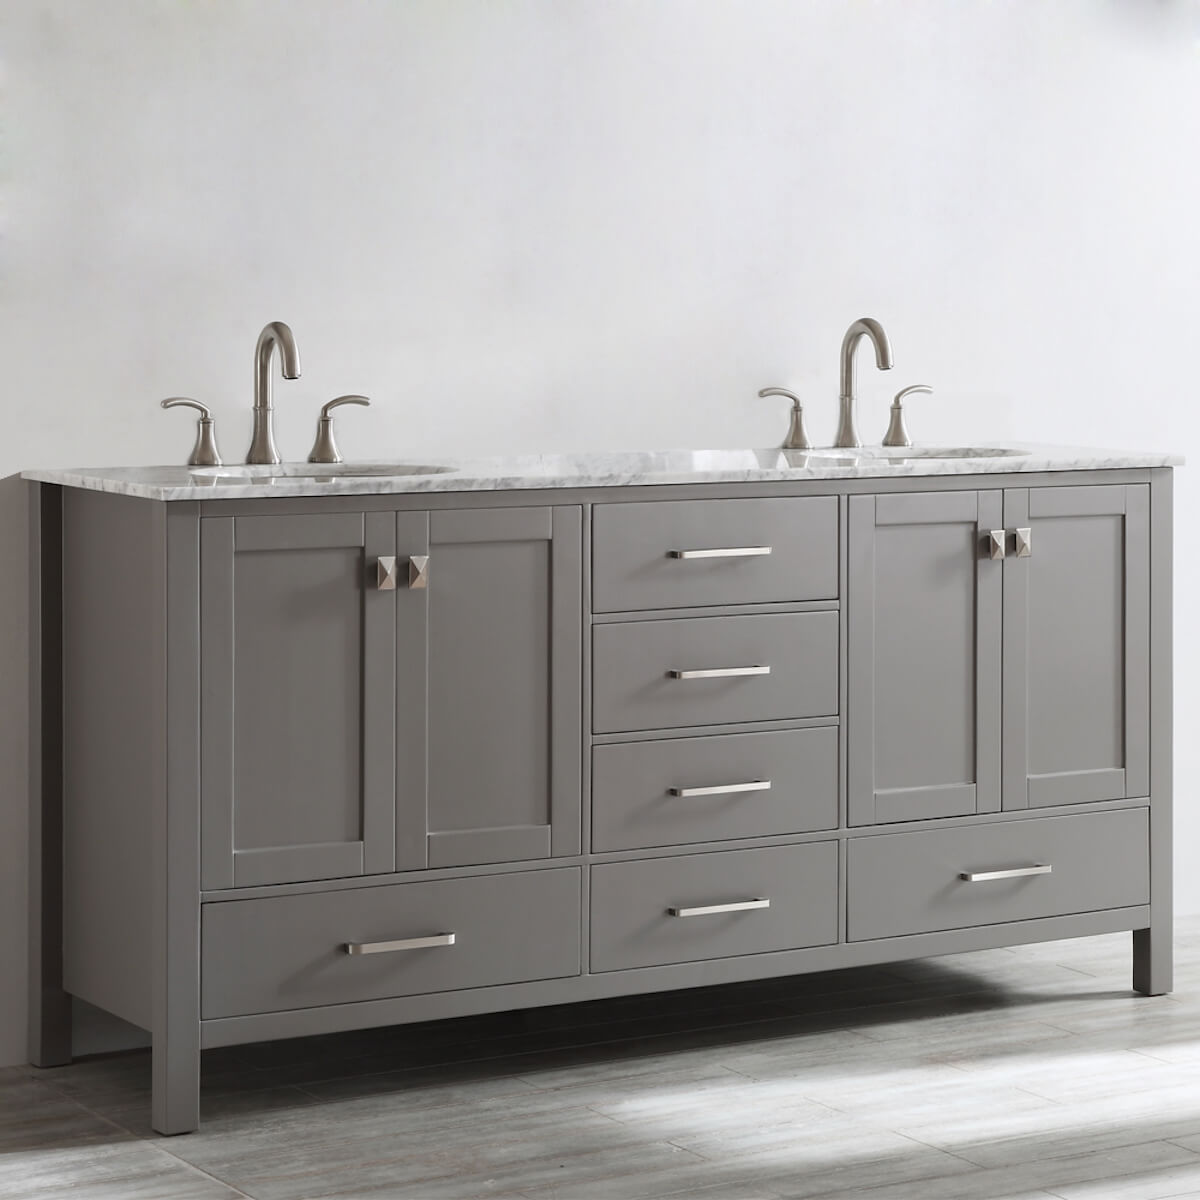 Vinnova Gela 72" Grey Double Vanity with Carrara White Marble Countertop Without Mirror Side 723072-GR-CA-NM